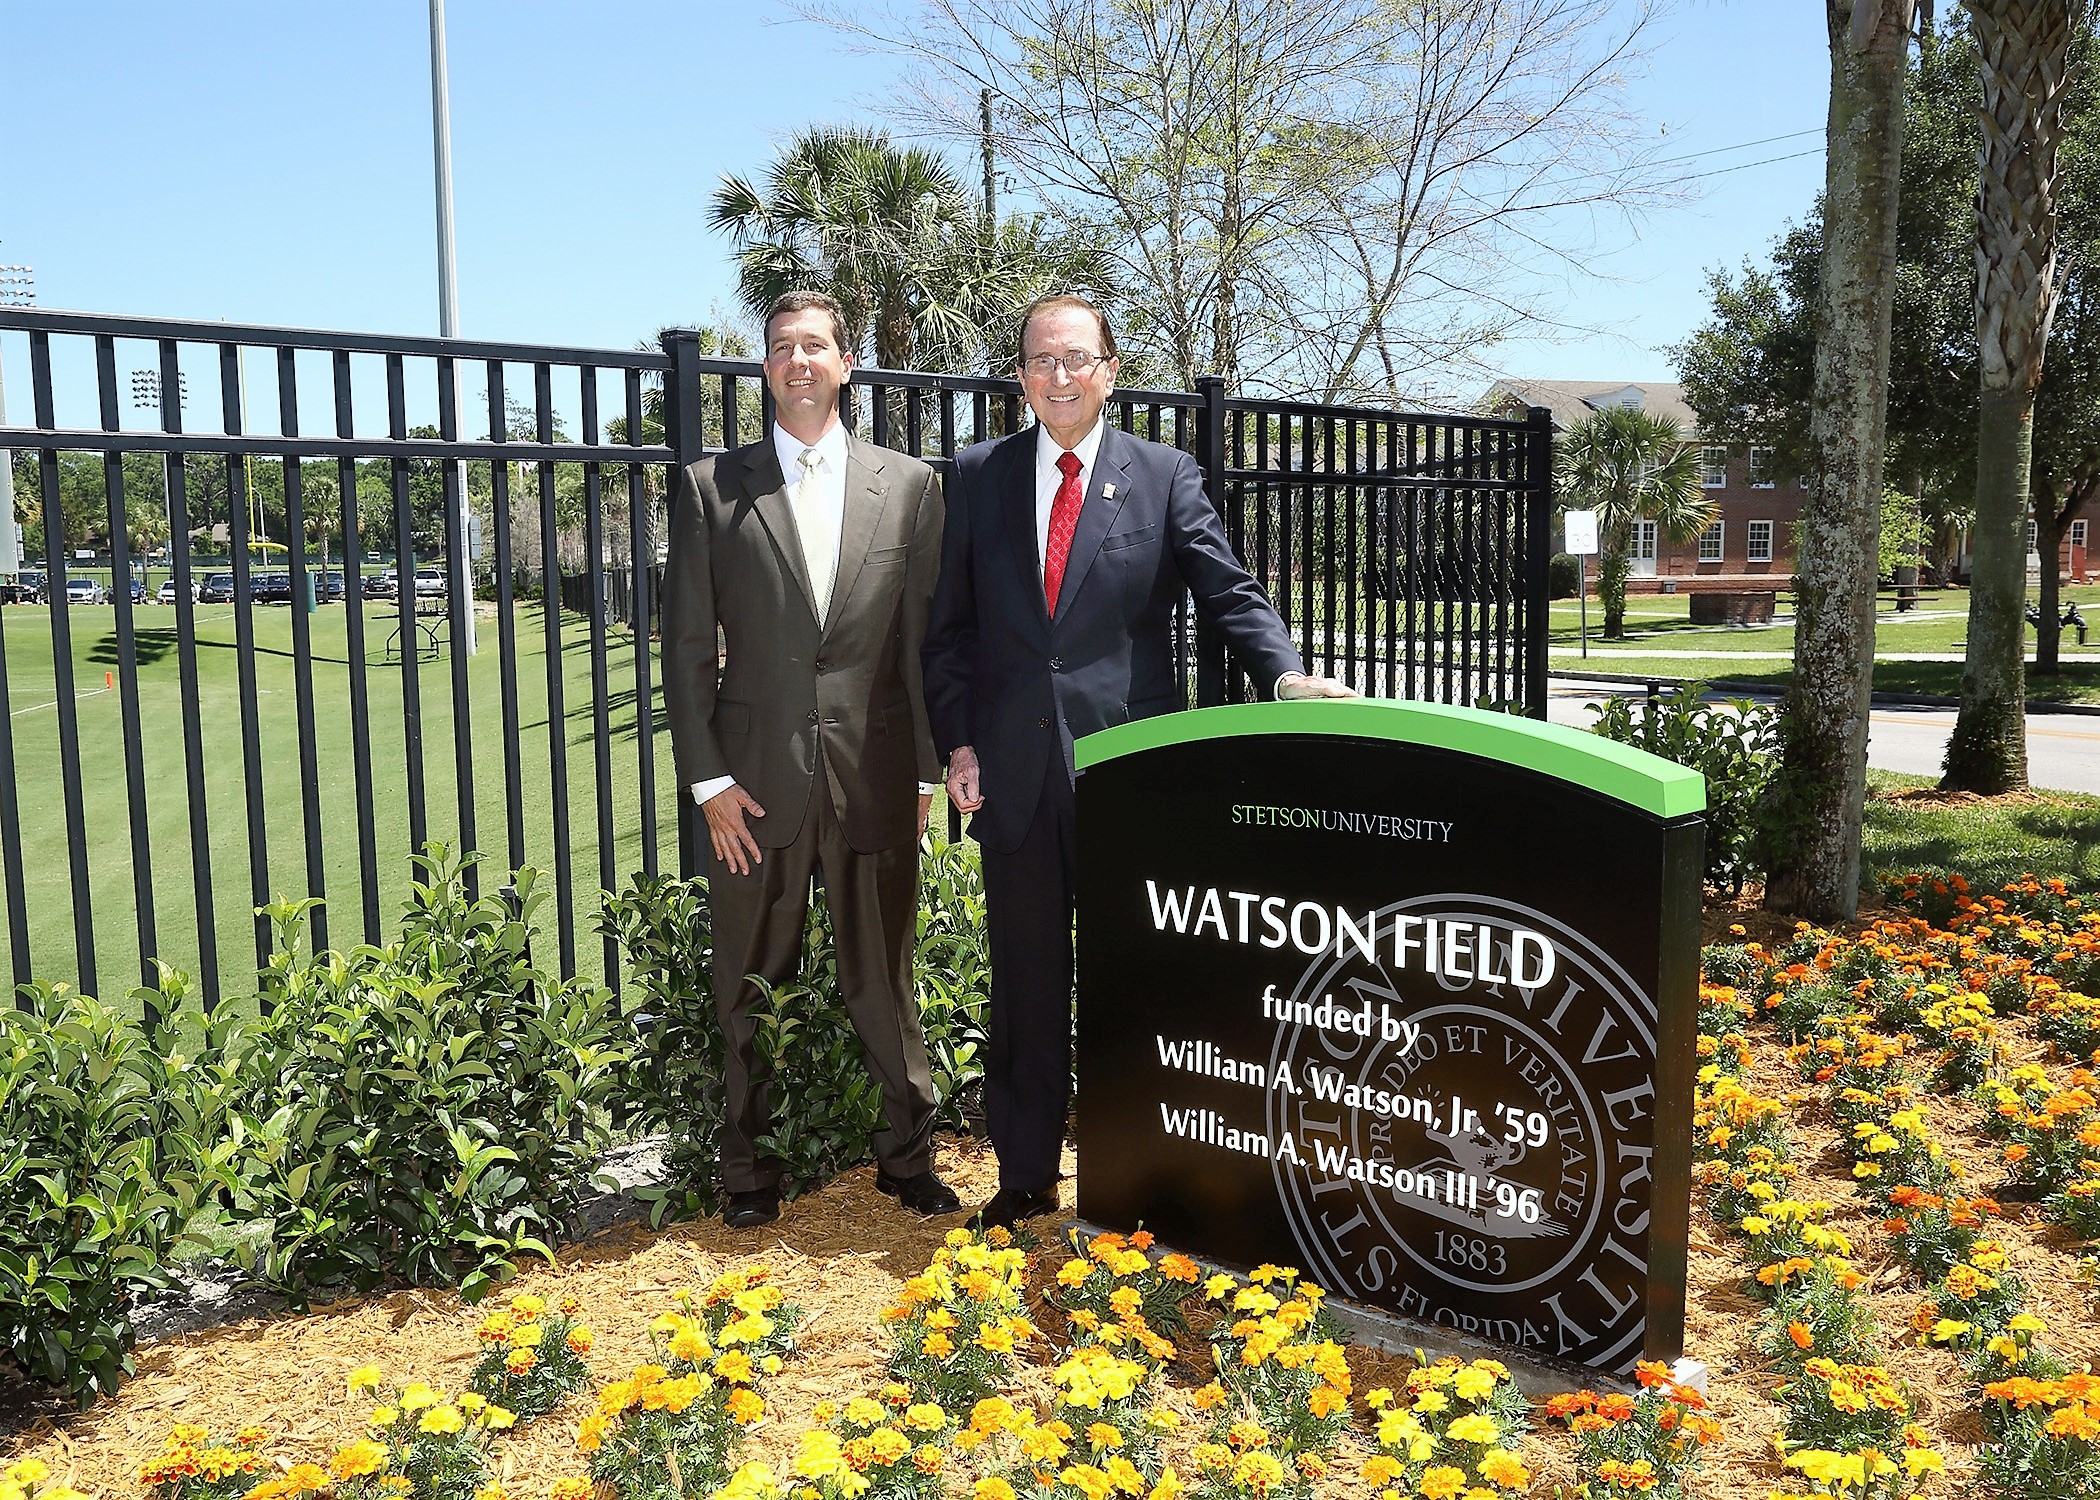 Bill Watson III and William A. Watson, Jr. stand in front of the new Watson Field sign at Stetson University.